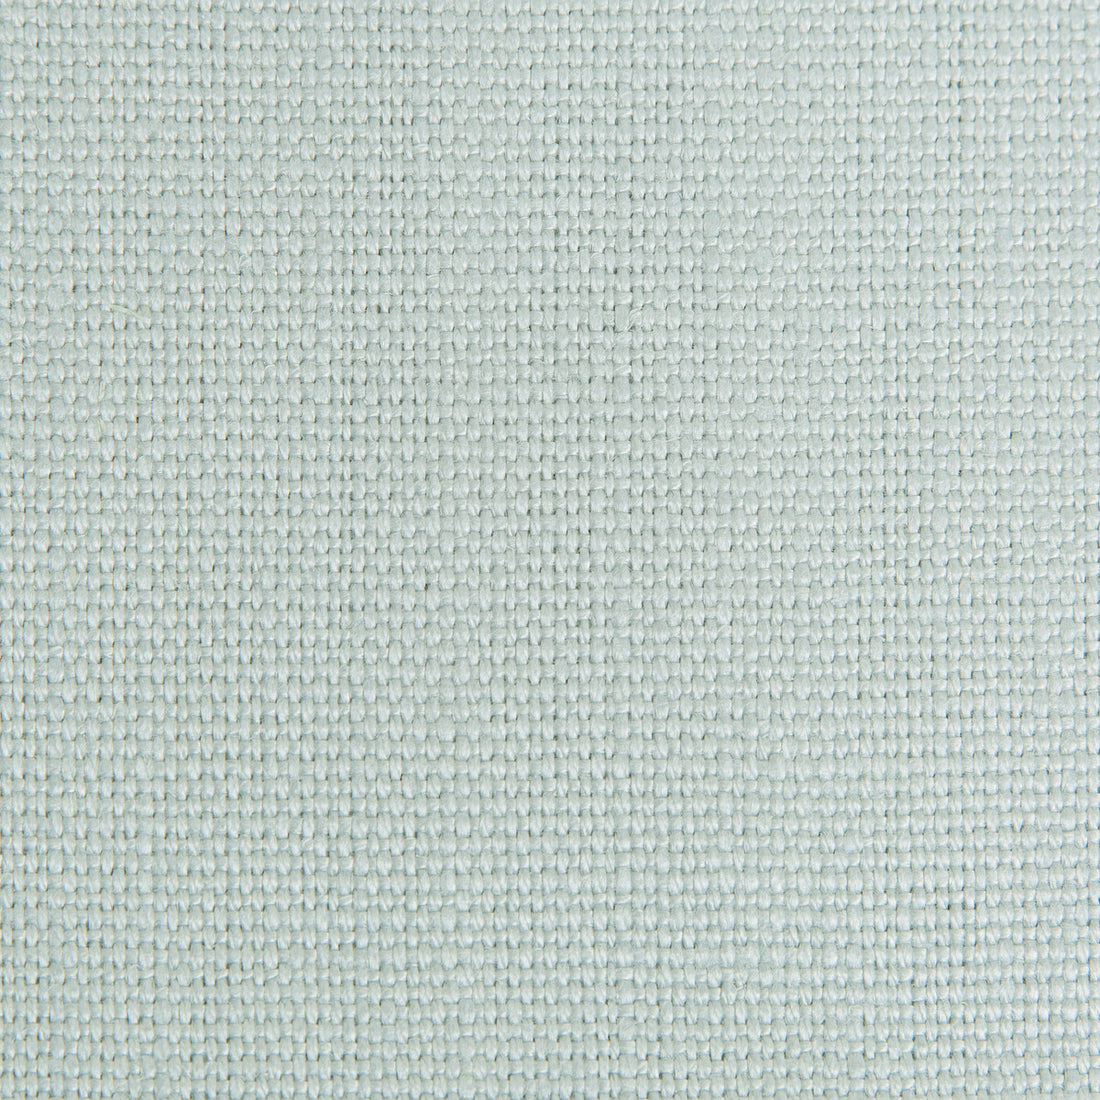 Hampton Linen fabric in seaside color - pattern 2012171.1501.0 - by Lee Jofa in the The Complete Linen IV collection